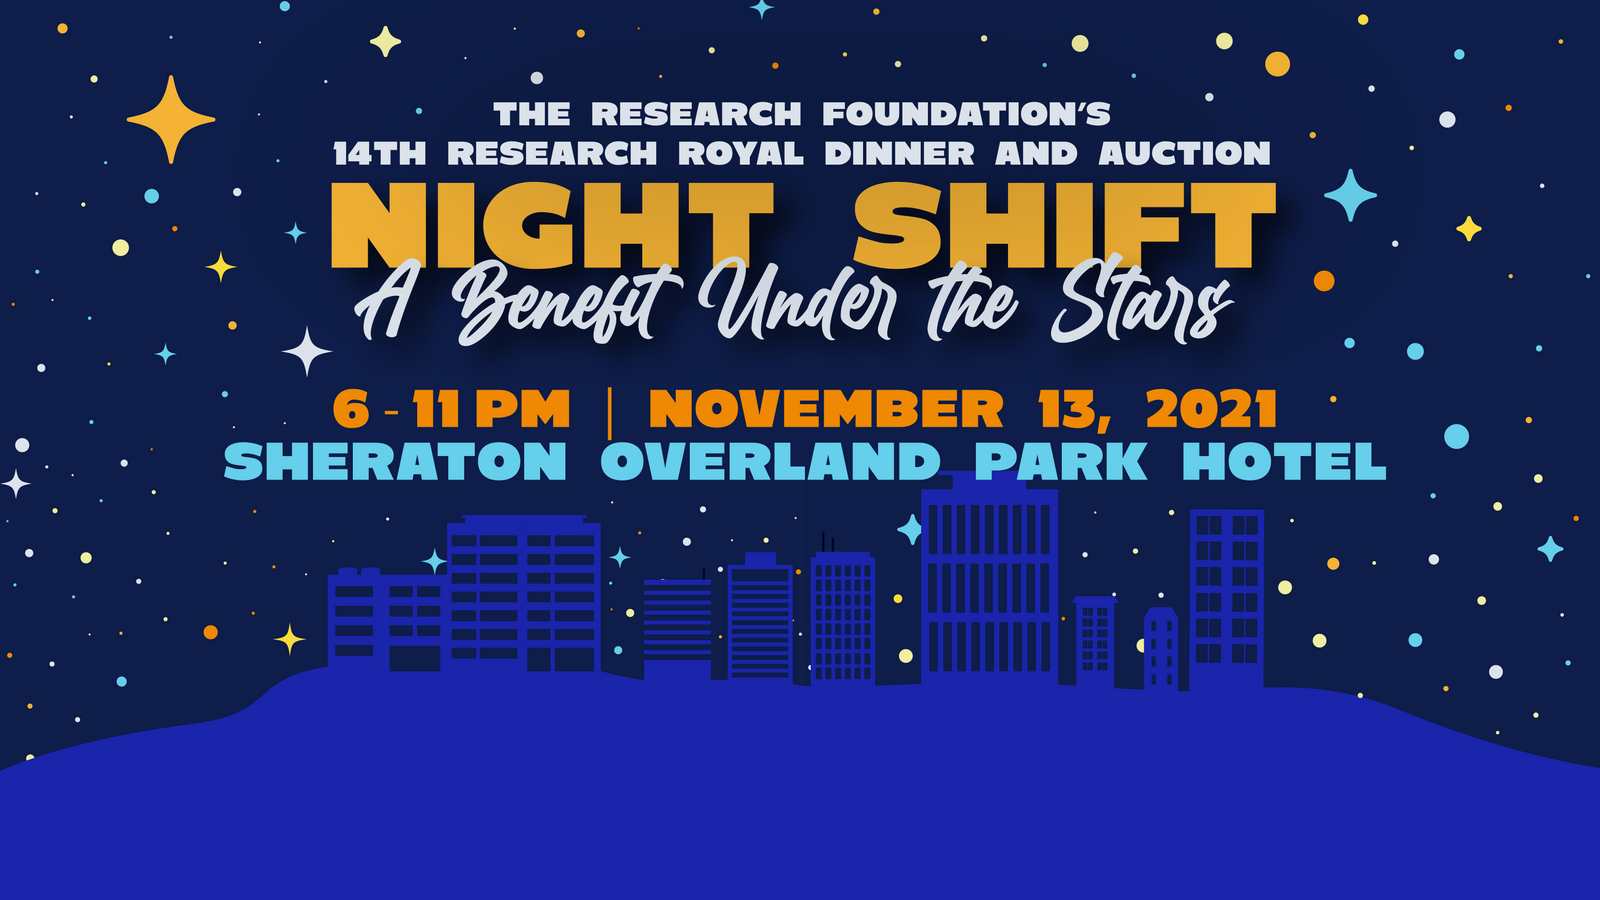 Tickets available for nursing student scholarship fundraiser hosted by The Research Foundation